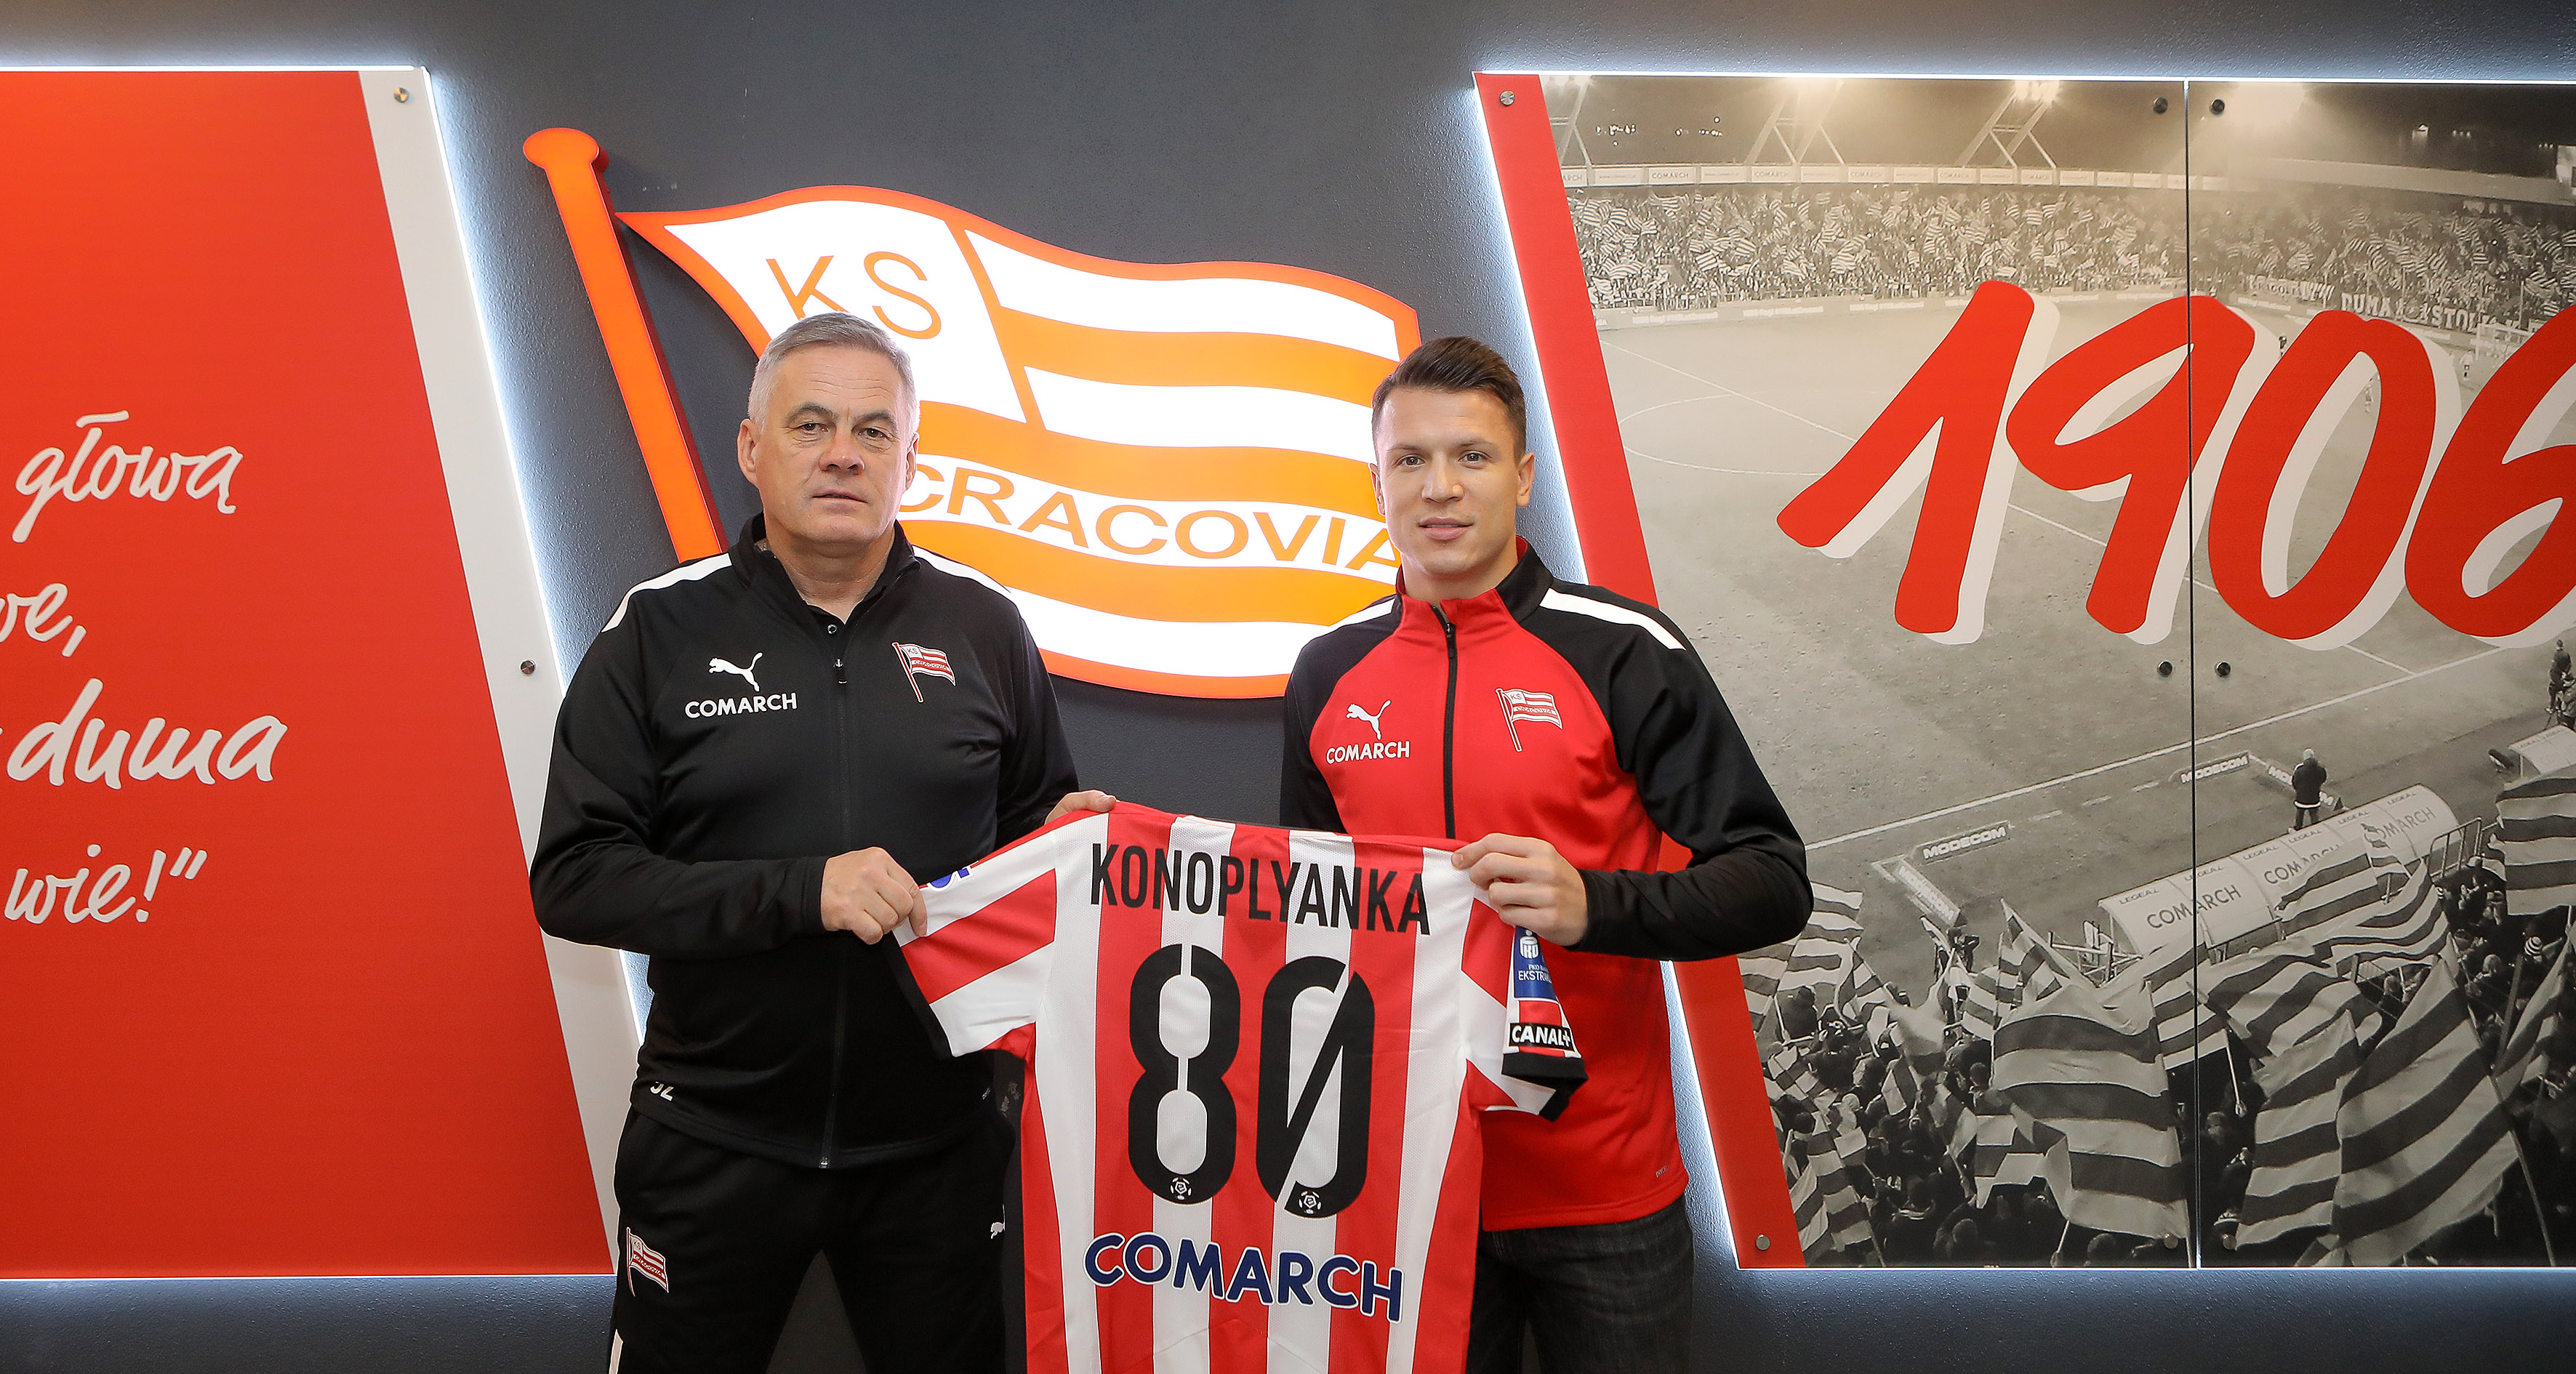 Konoplyanka is the new player of Cracovia! 